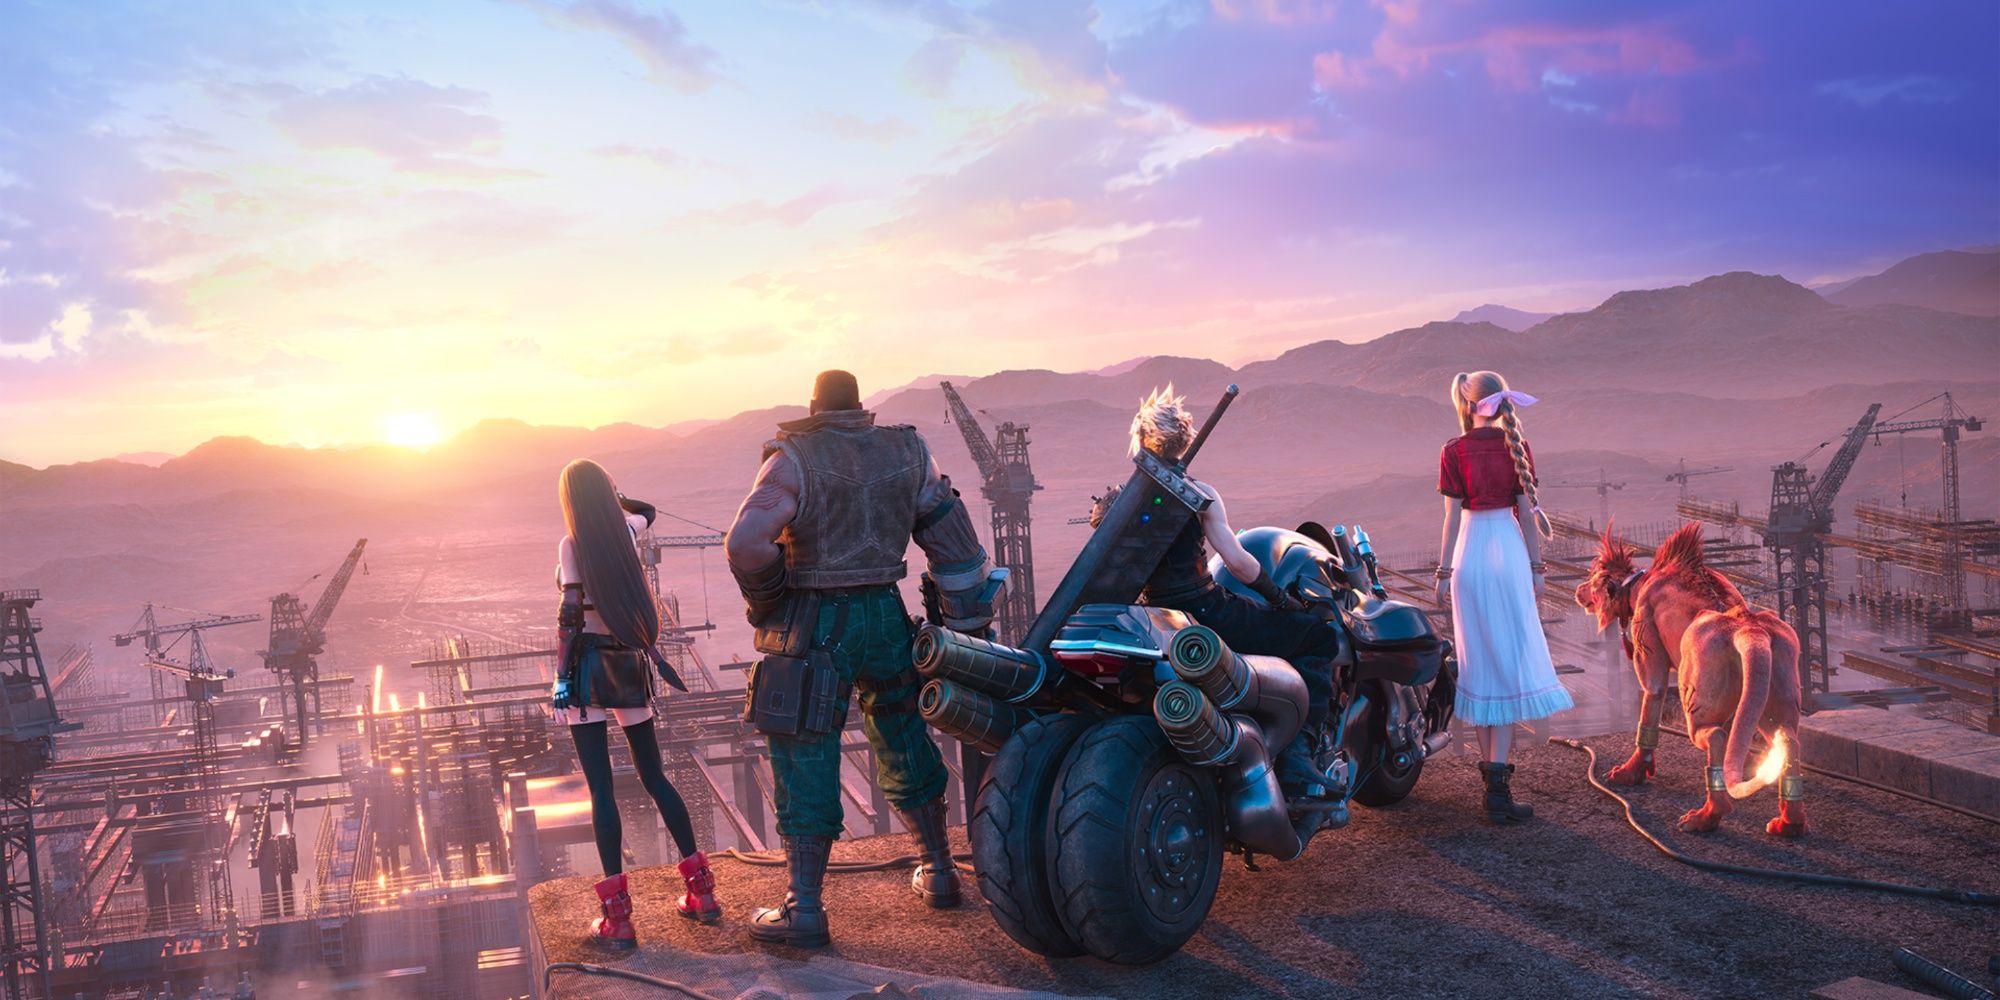 Tifa, Barret, Cloud, Aerith, and Red 13 stand on the outskirts of Midgar